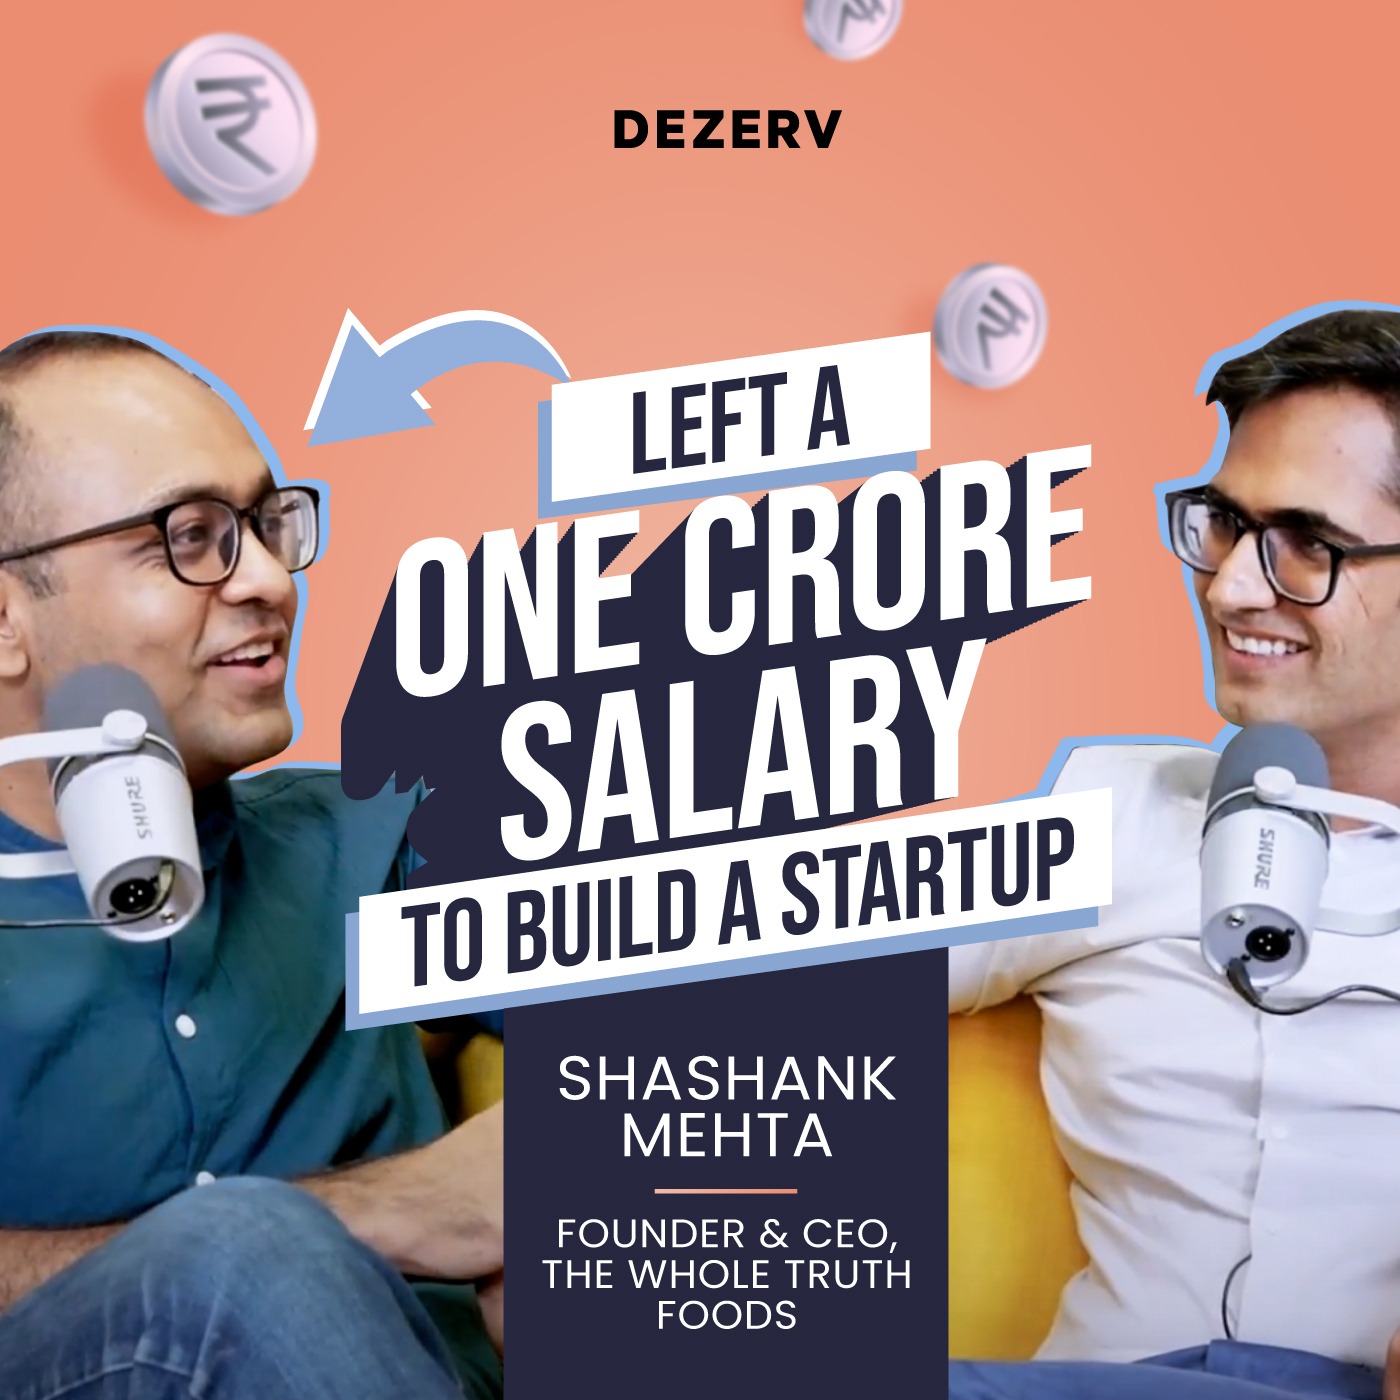 From leaving 1 CRORE SALARY to building a 600 CRORE business Ft. Shashank Mehta, Founder of The Whole Truth Foods